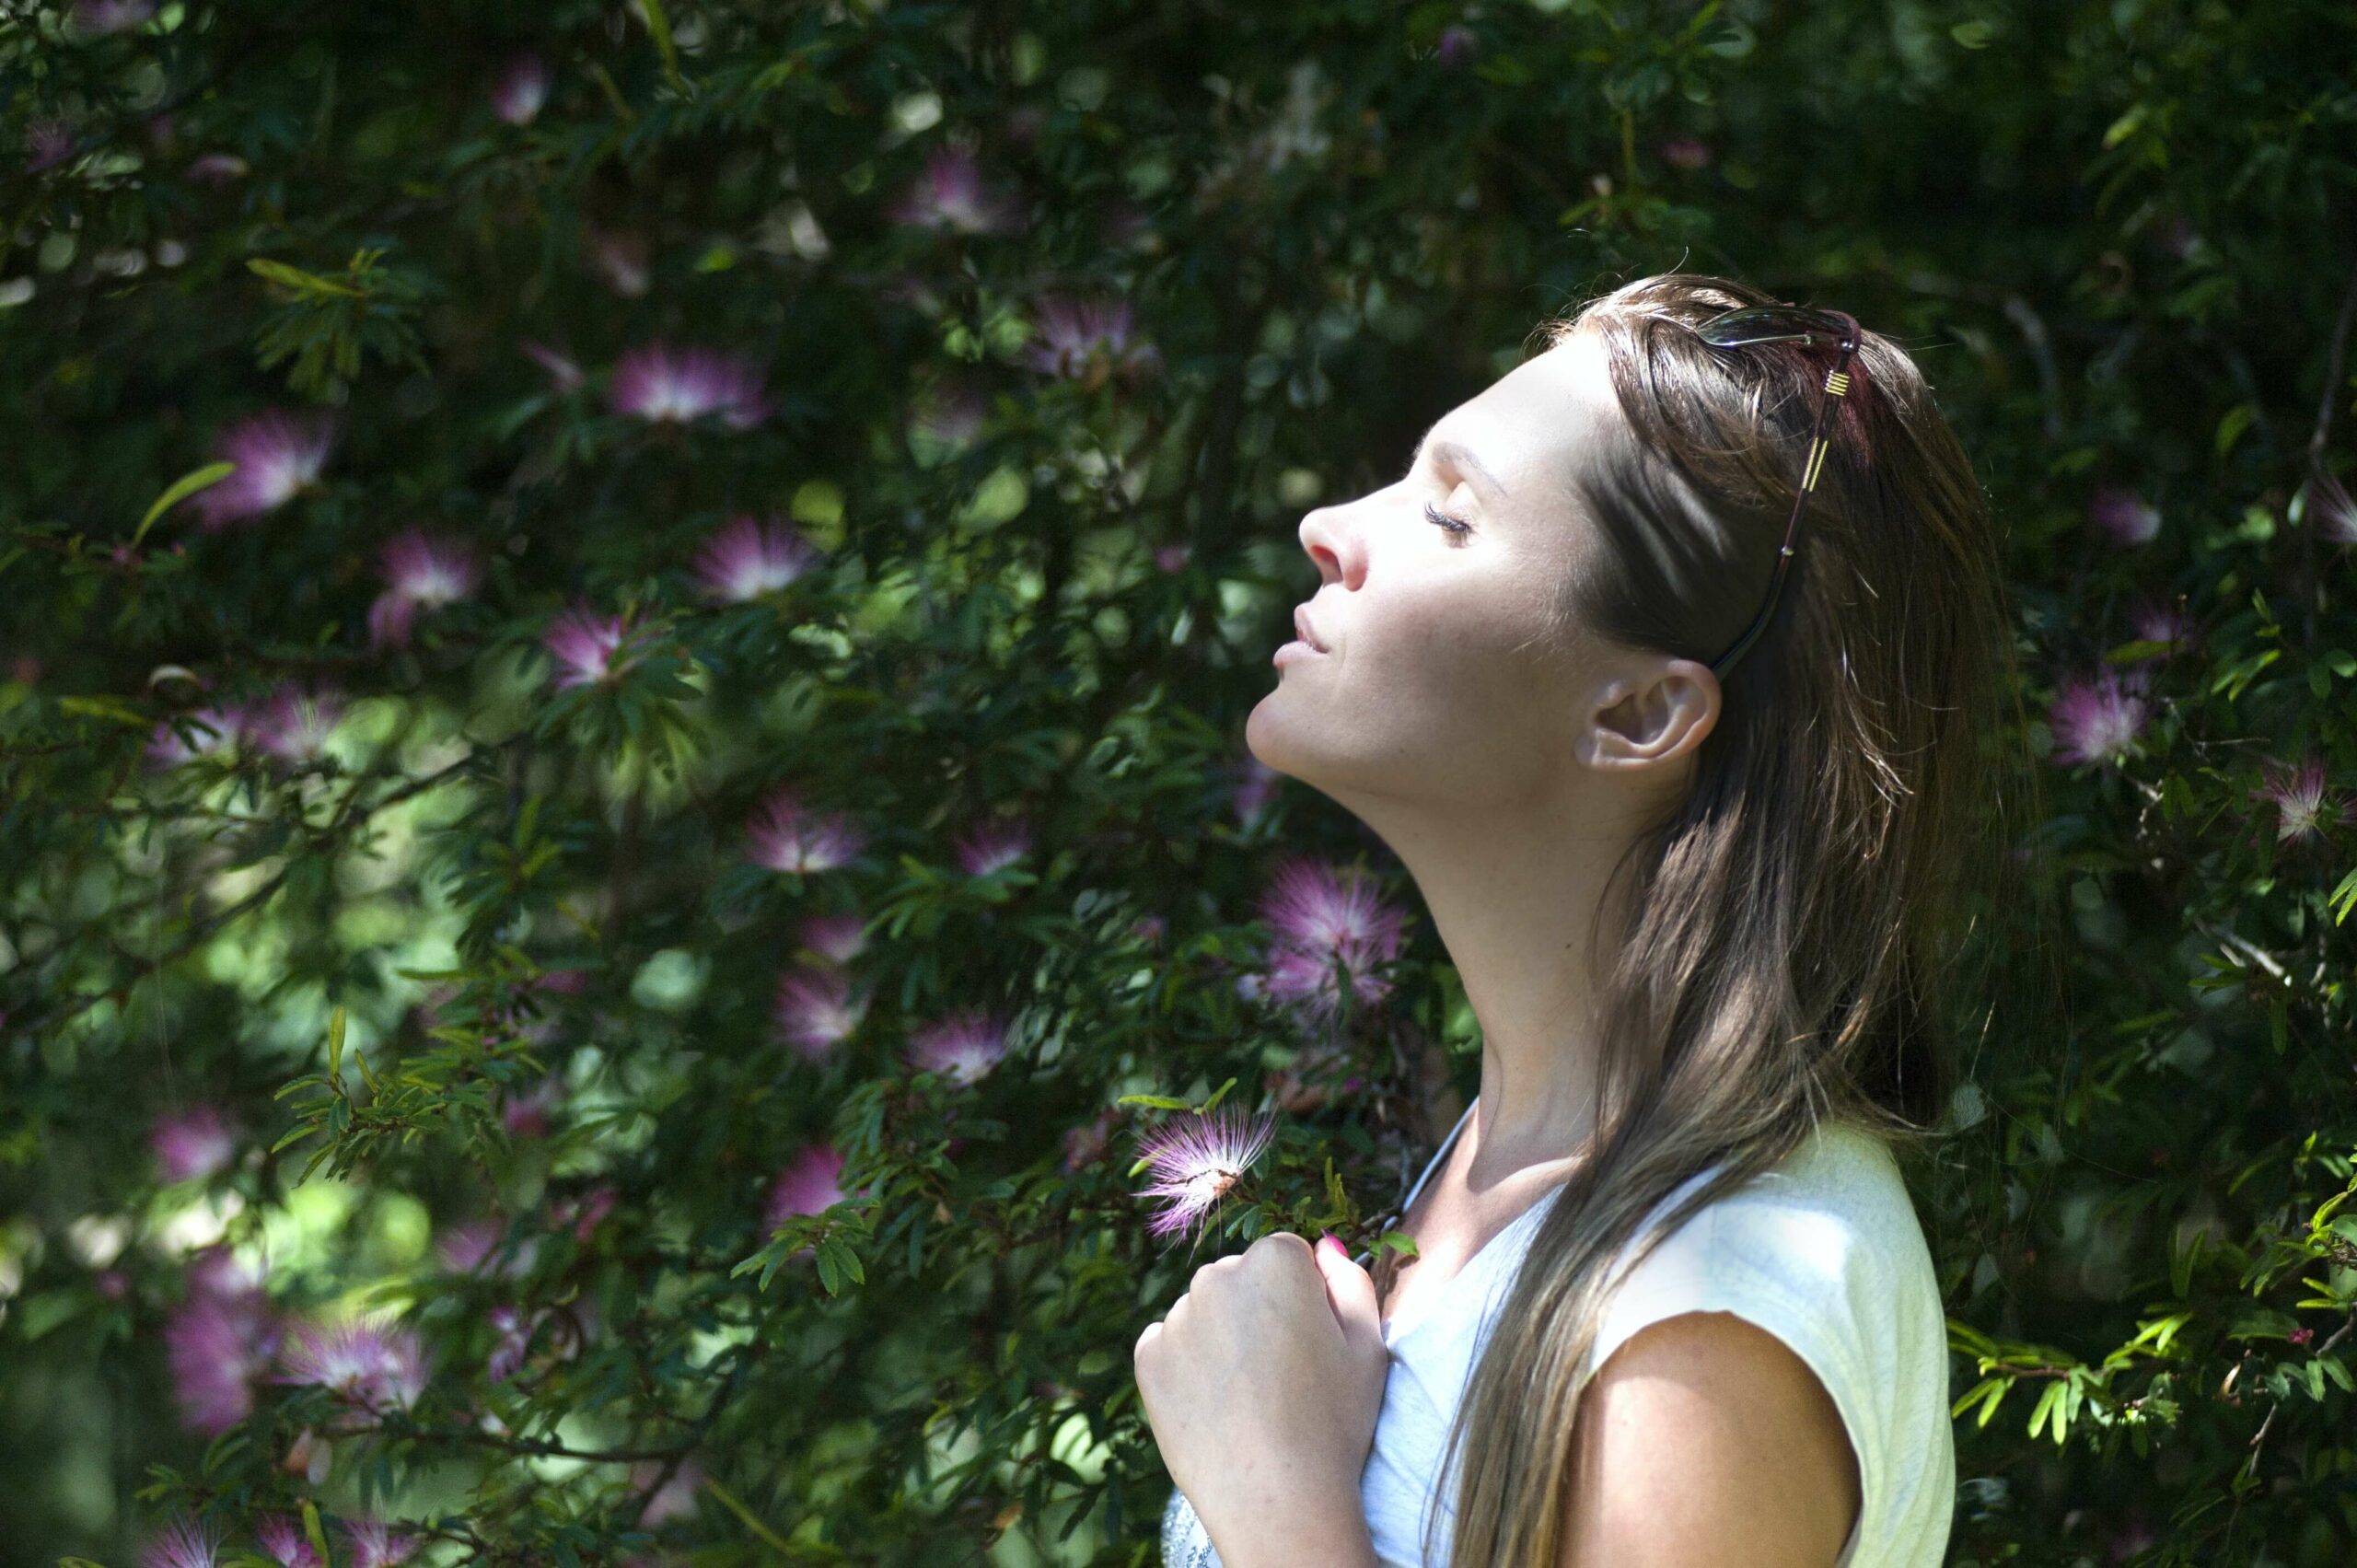 A woman practices breathing deeply to relax utilizing mindfulness exercises in Washington, DC.